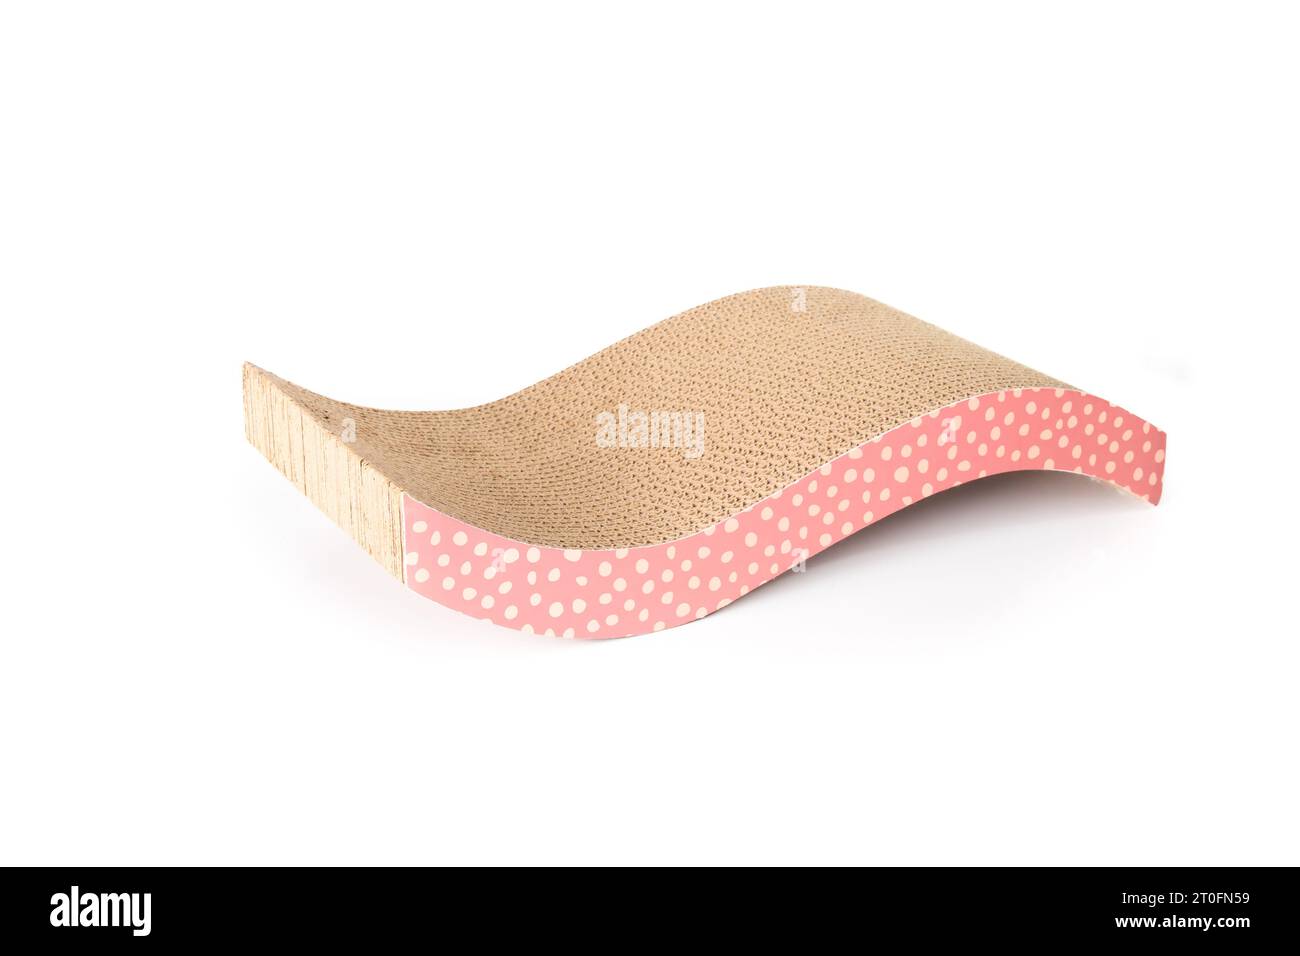 Cat cardboard scratcher. Curved card board post. Cats enjoy to scratch and sharpen claws. Prevents furniture damage. Physical enrichment and mental st Stock Photo